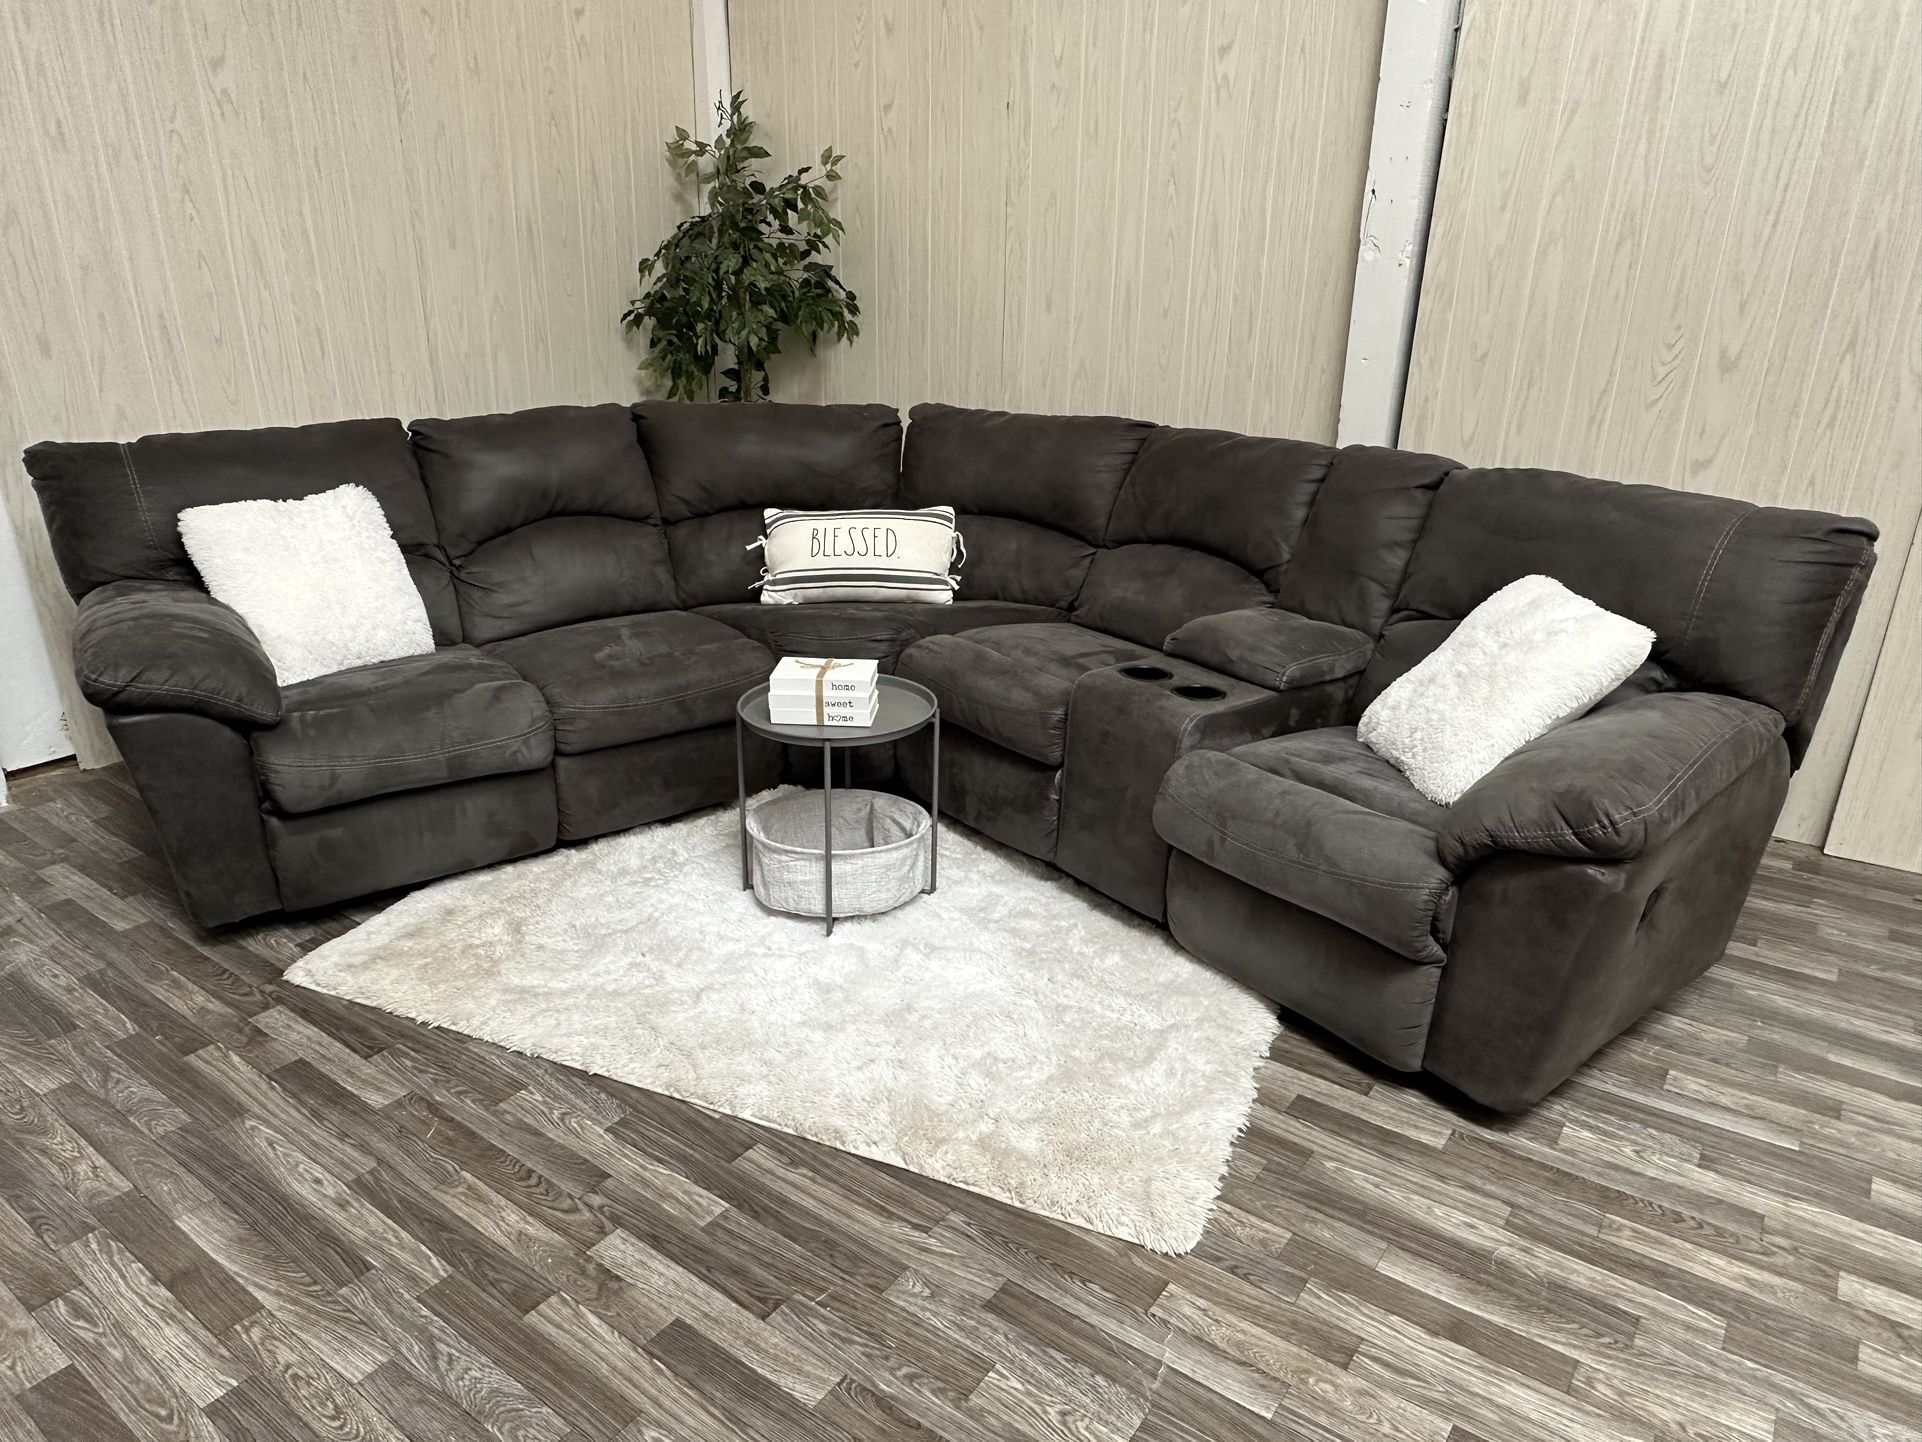 Gray Reclining Sectional Couch (Ashley Furniture) -Delivery Available 